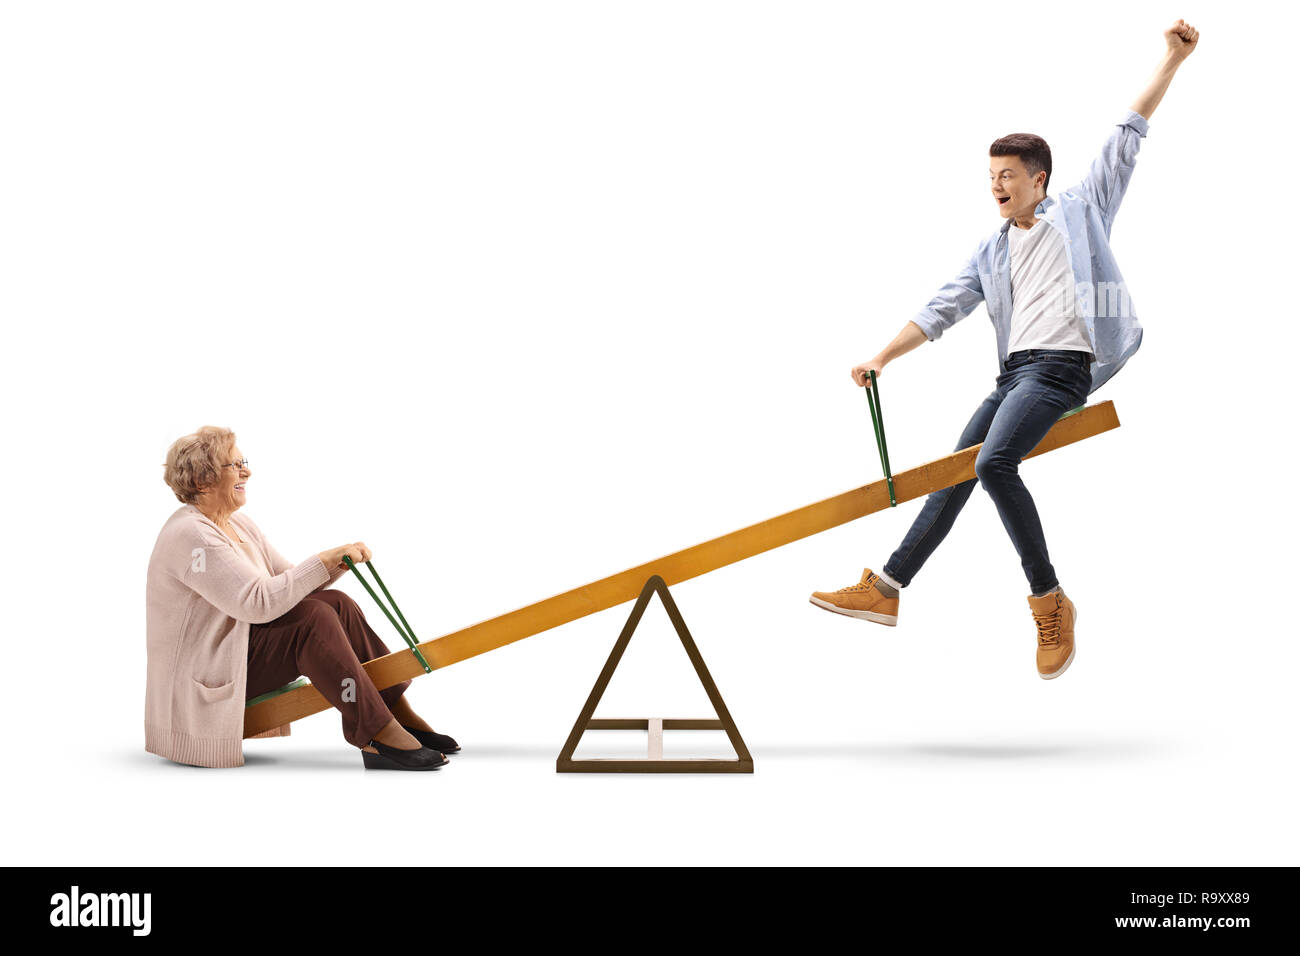 Grandmother and her teenage grandson on a seesaw isolated on white background Stock Photo